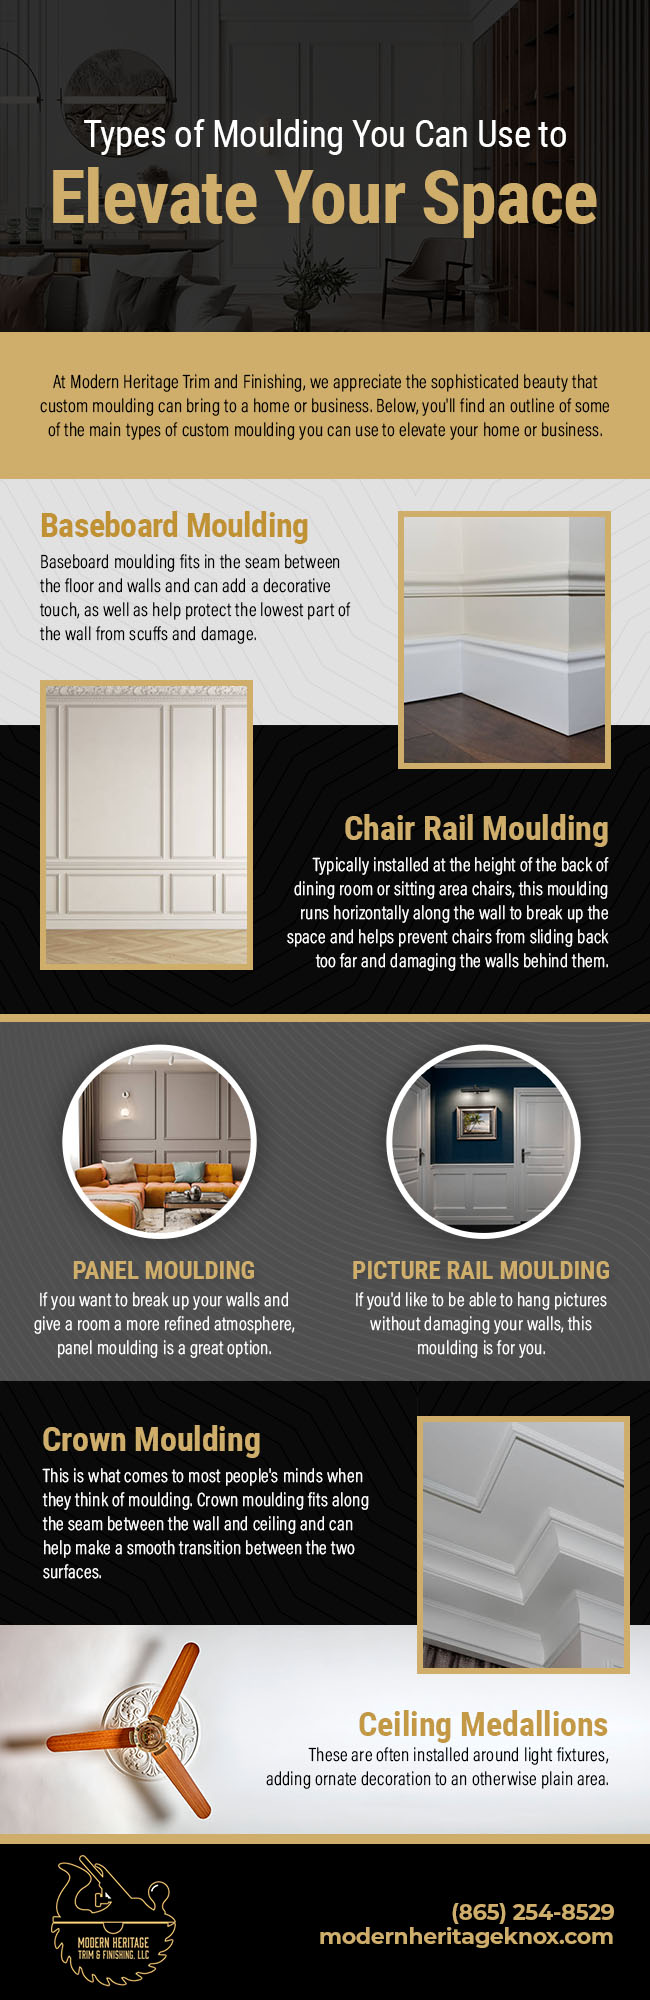 Types of Moulding You Can Use to Elevate Your Space